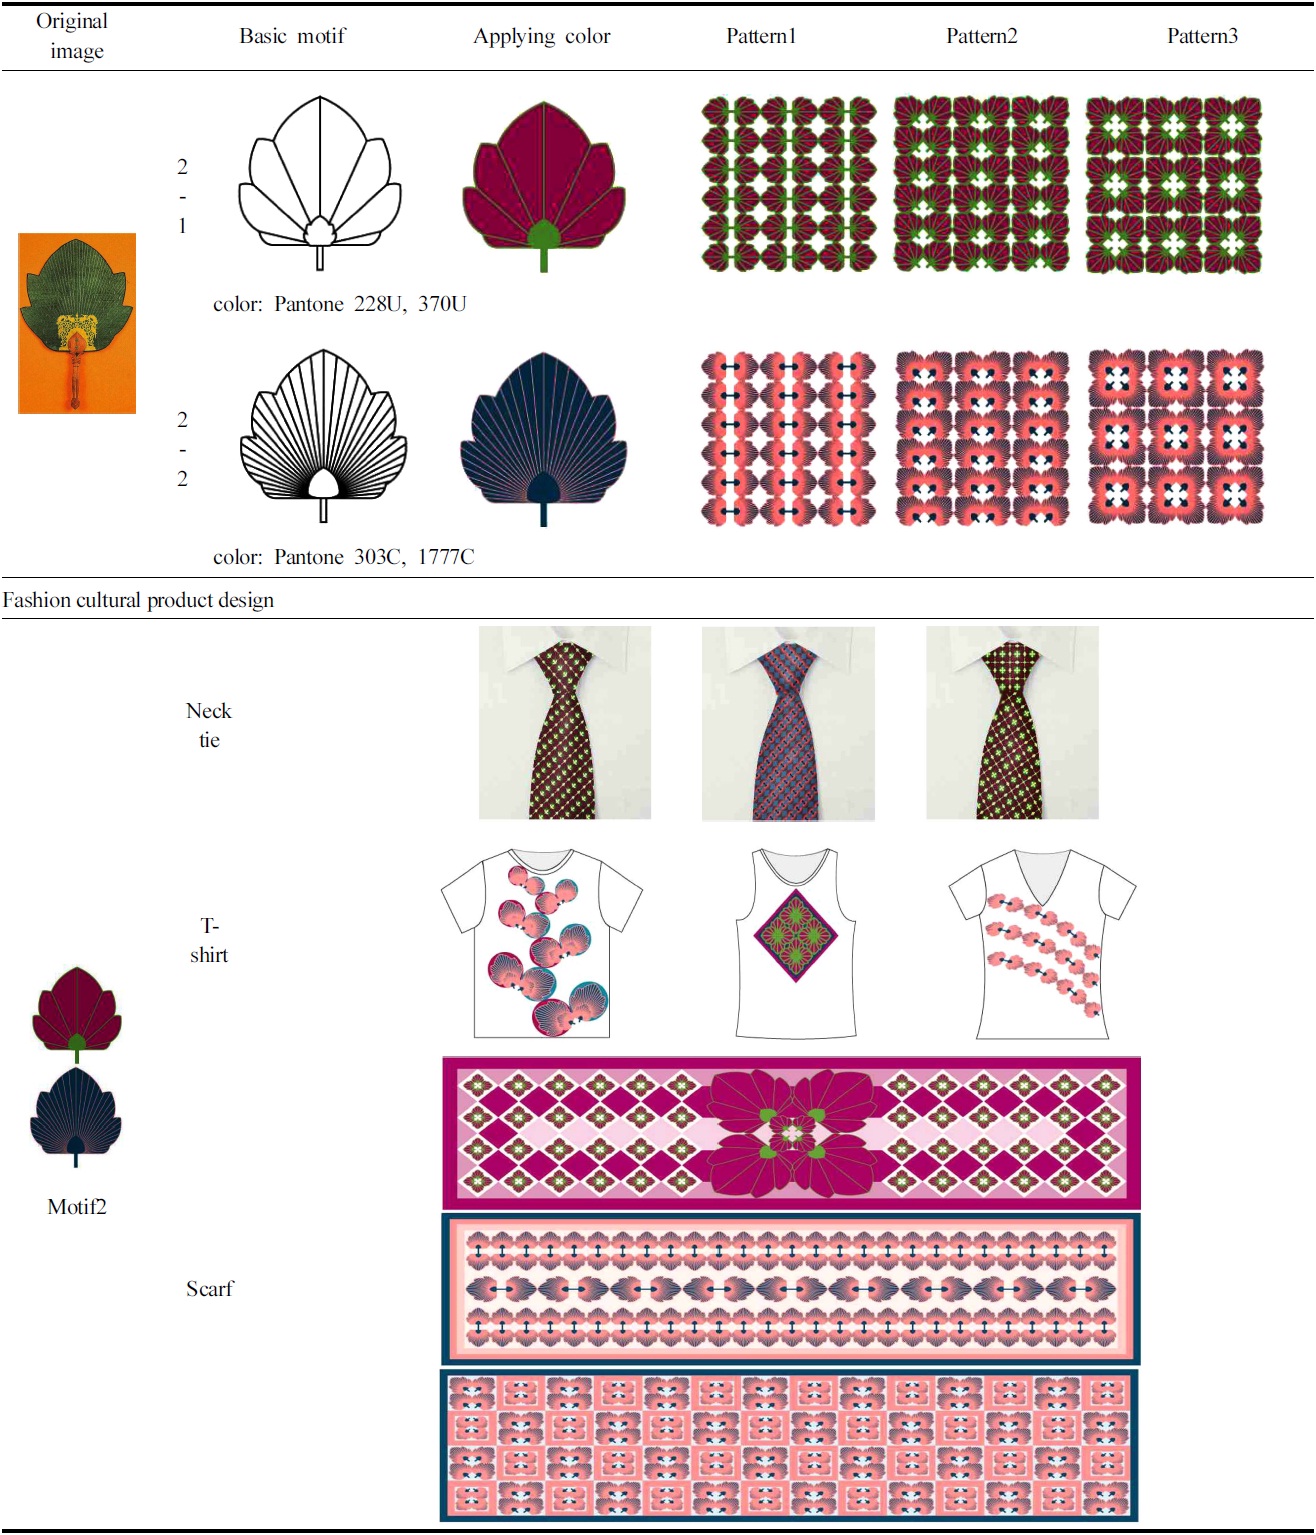 Development of motif design 2 and fashion cultural product design